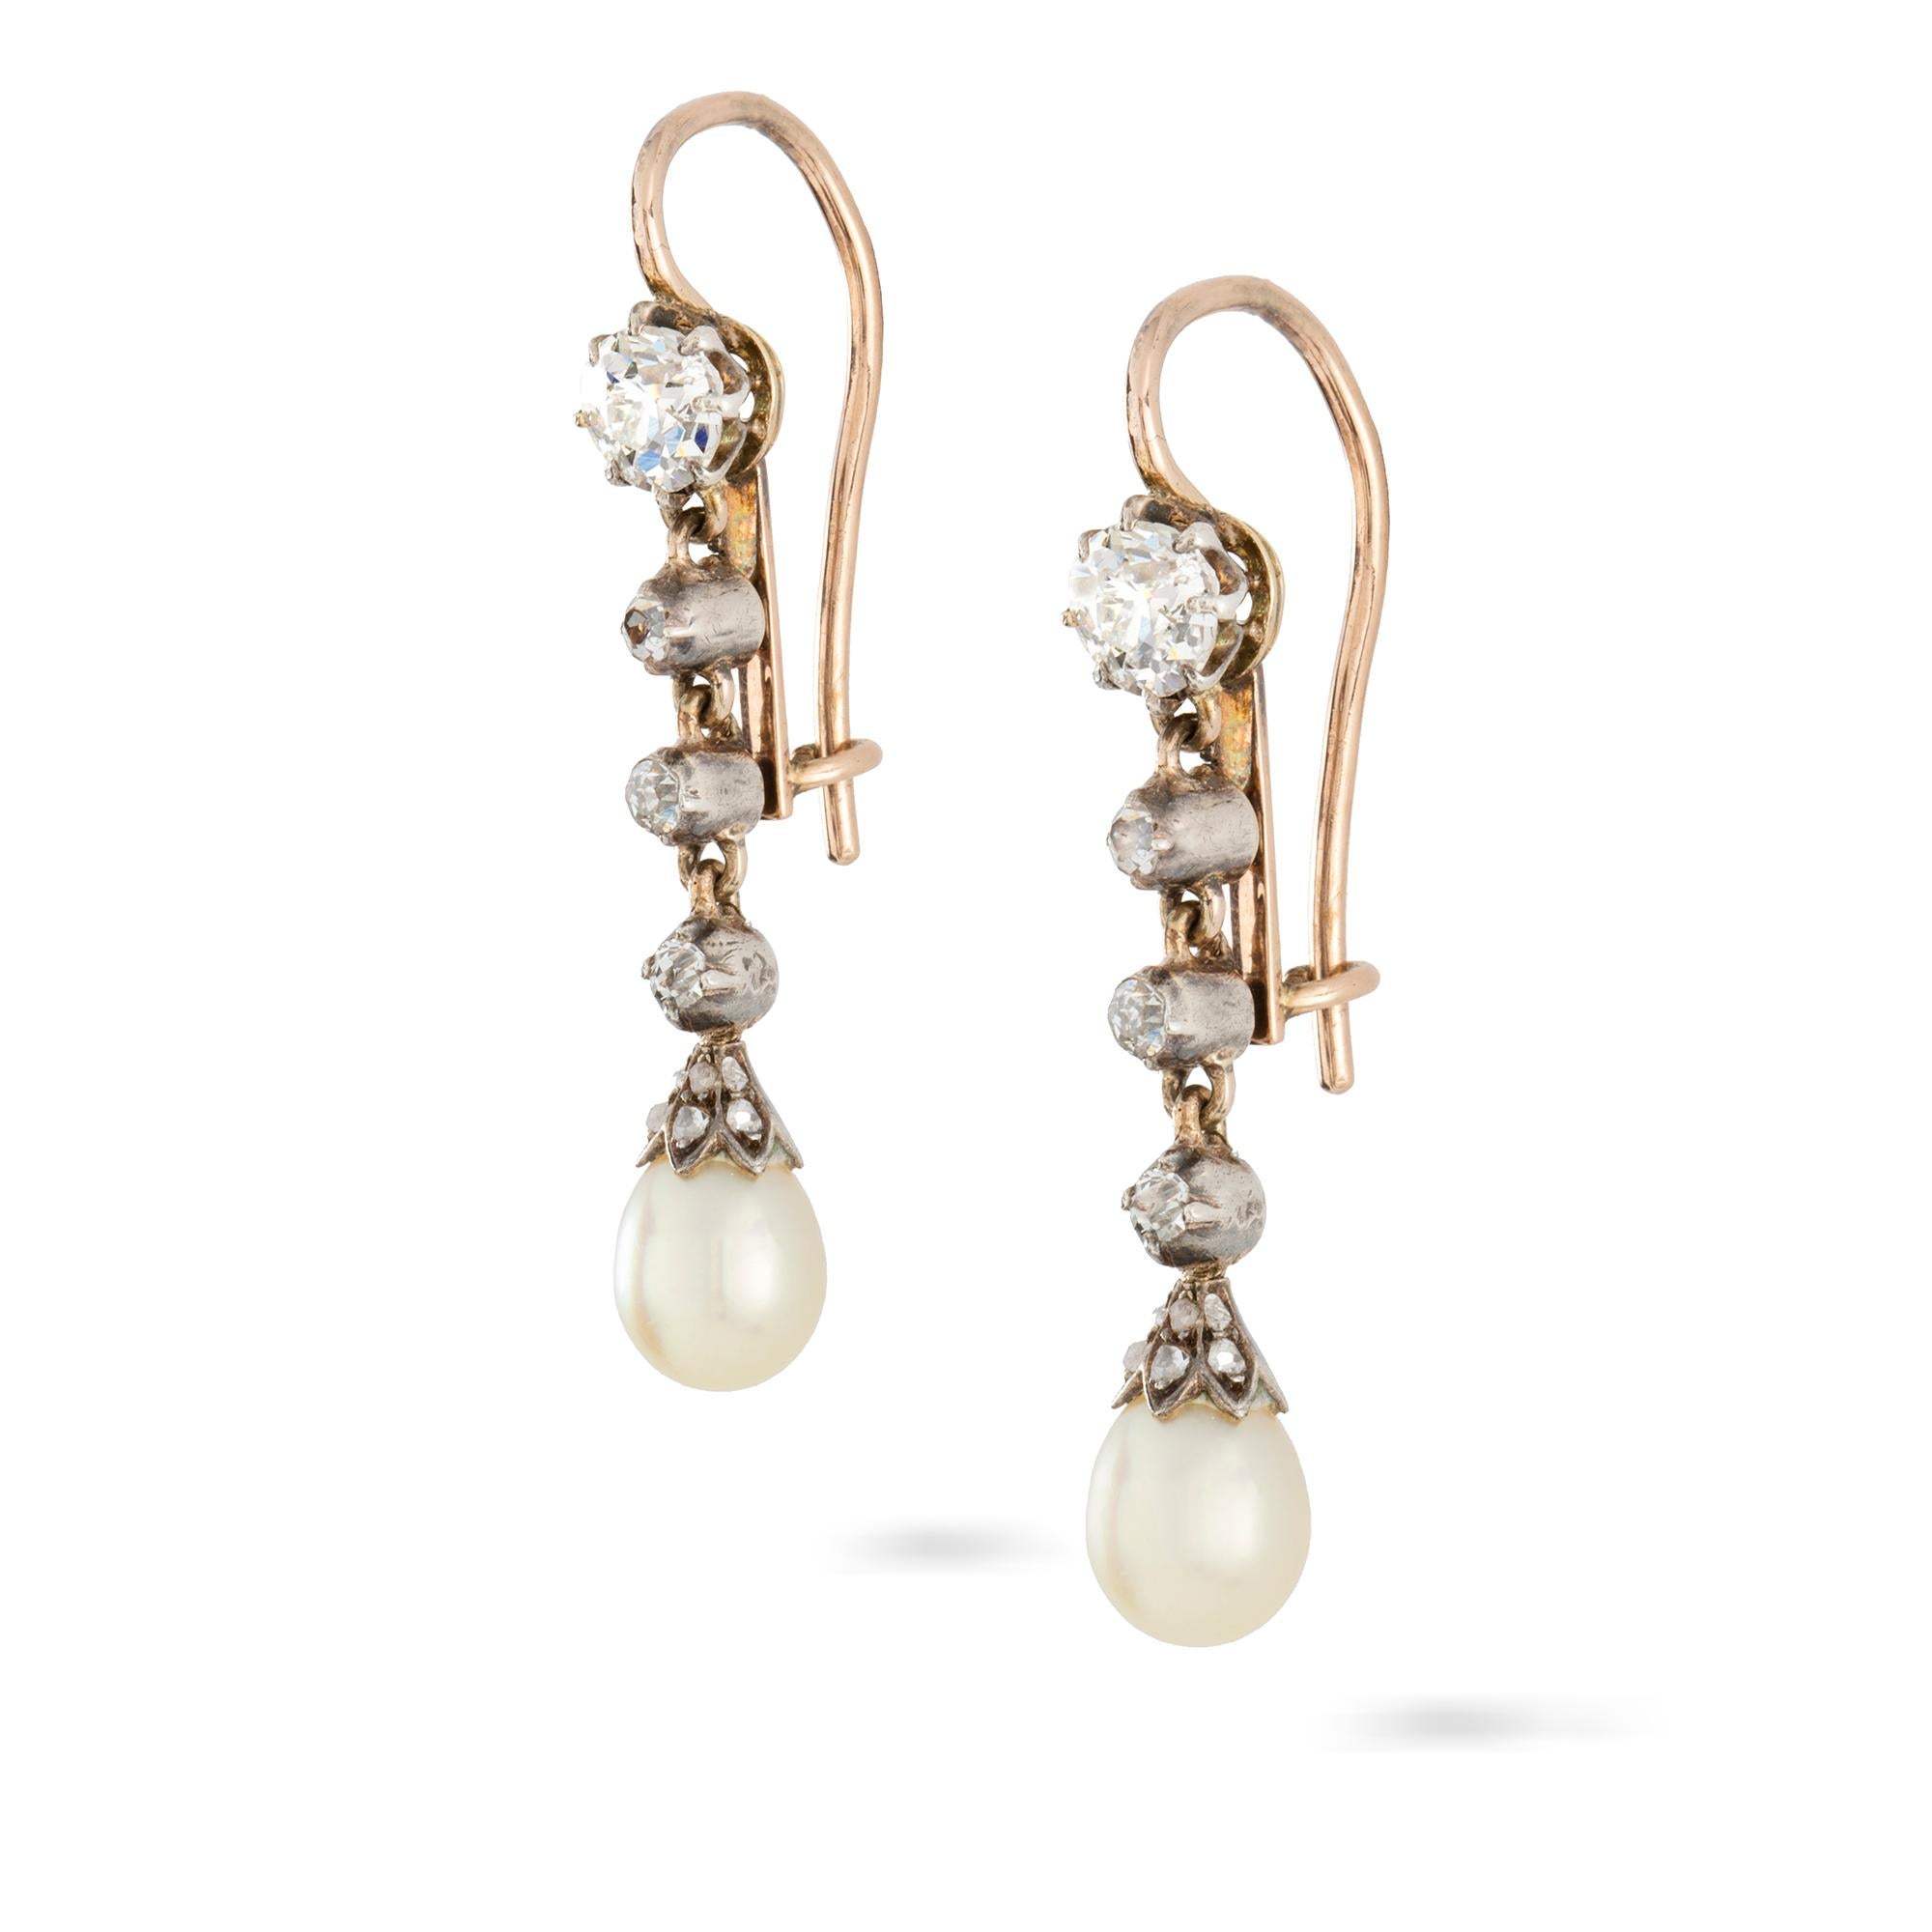 A pair of early 20th century natural pearl and diamond drop earrings, each consisting of an old-cut diamond top suspending a line of three old-cut diamond collets to a natural pearl drop terminal with diamond-set cap, all set to a silver front and